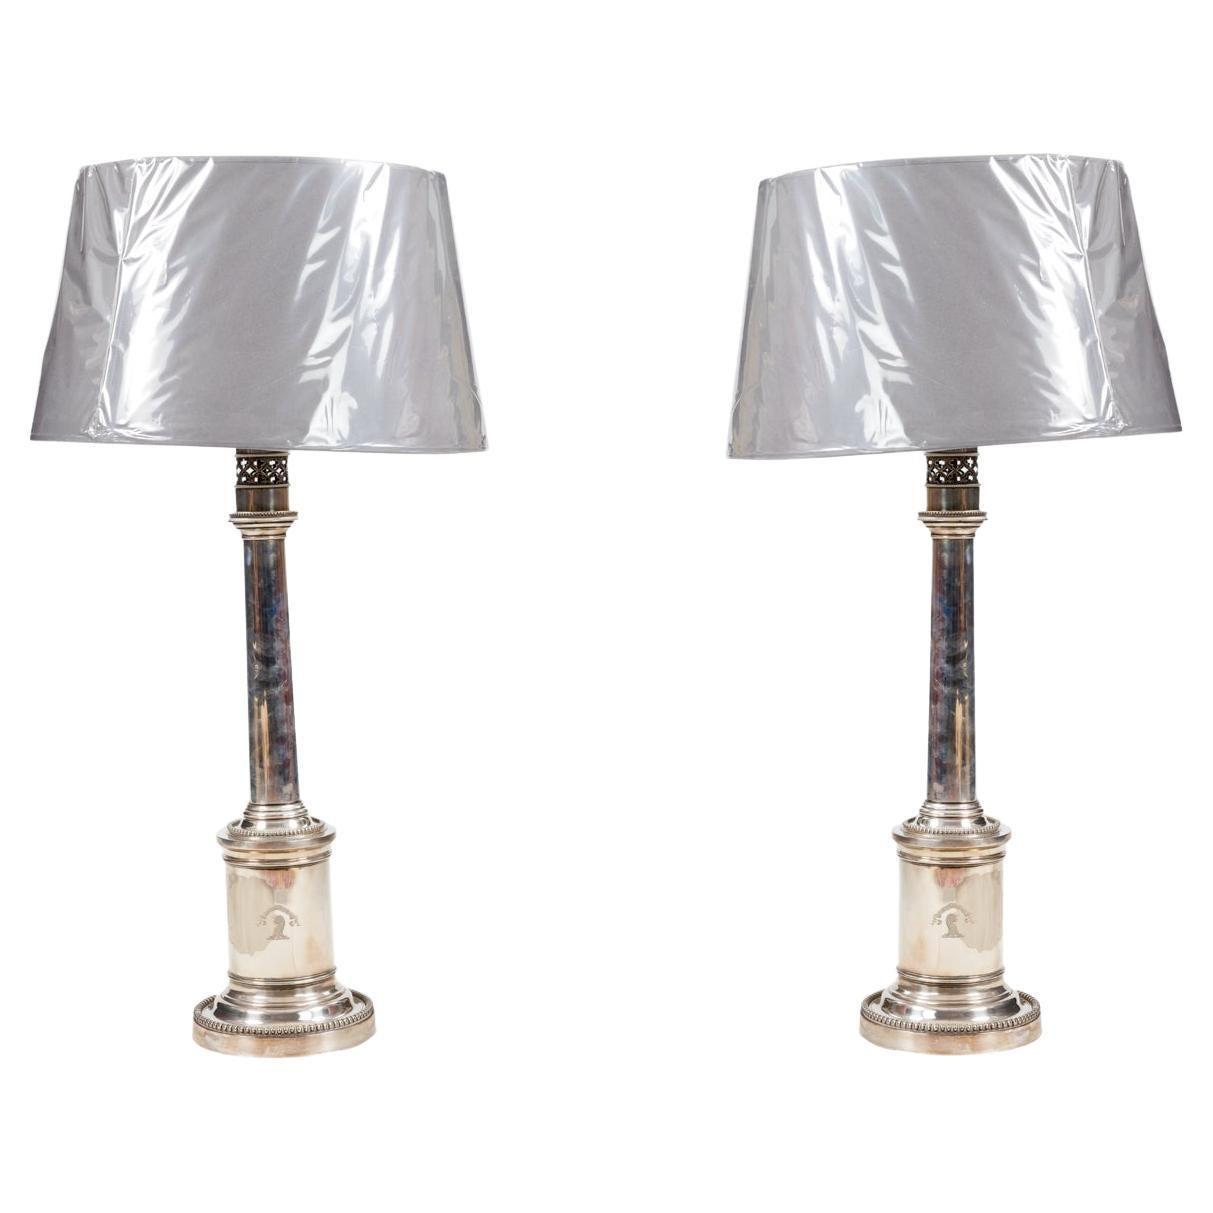 Pair of 19th Century Silver-Plated Table Lamps